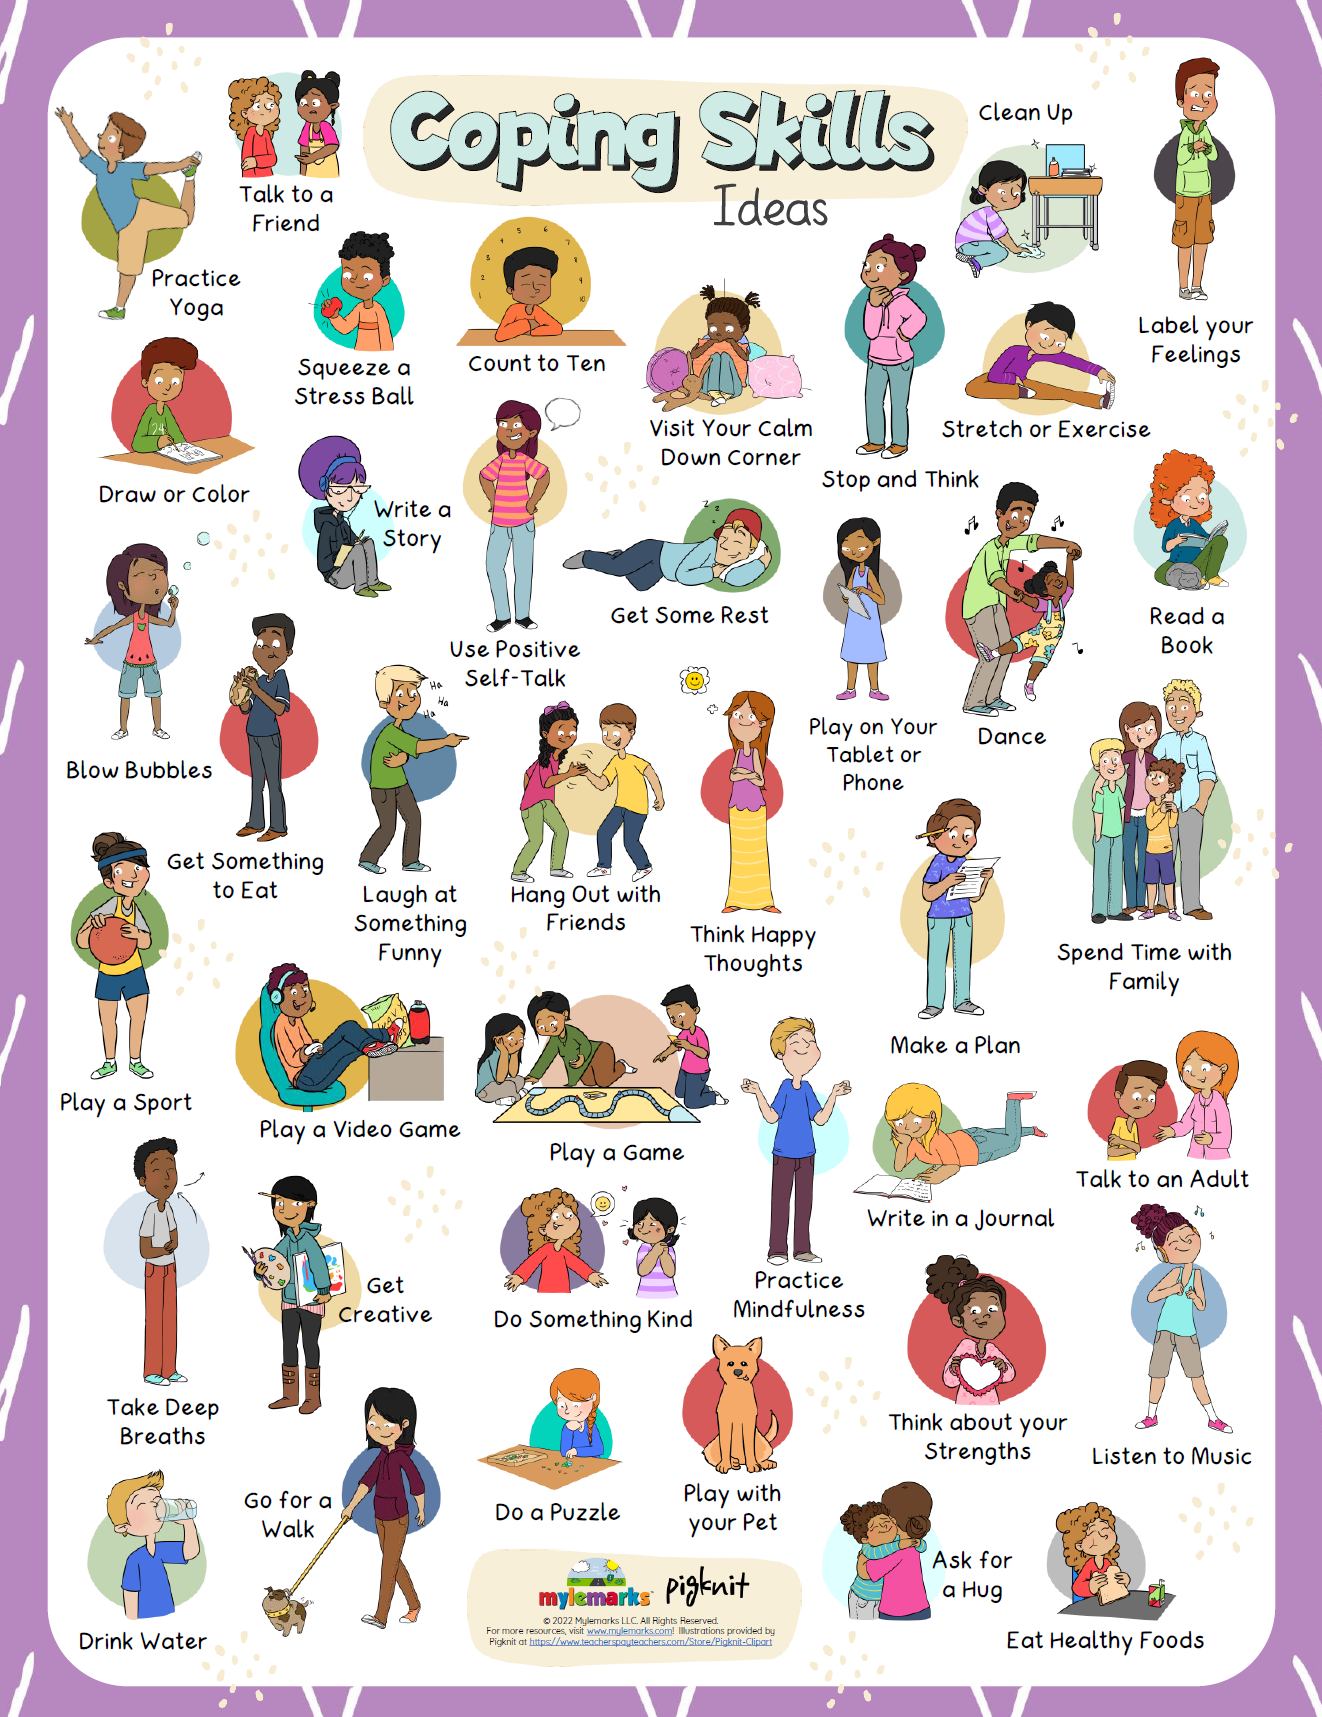 Coping Skills Cards ( Poster) (Printable)